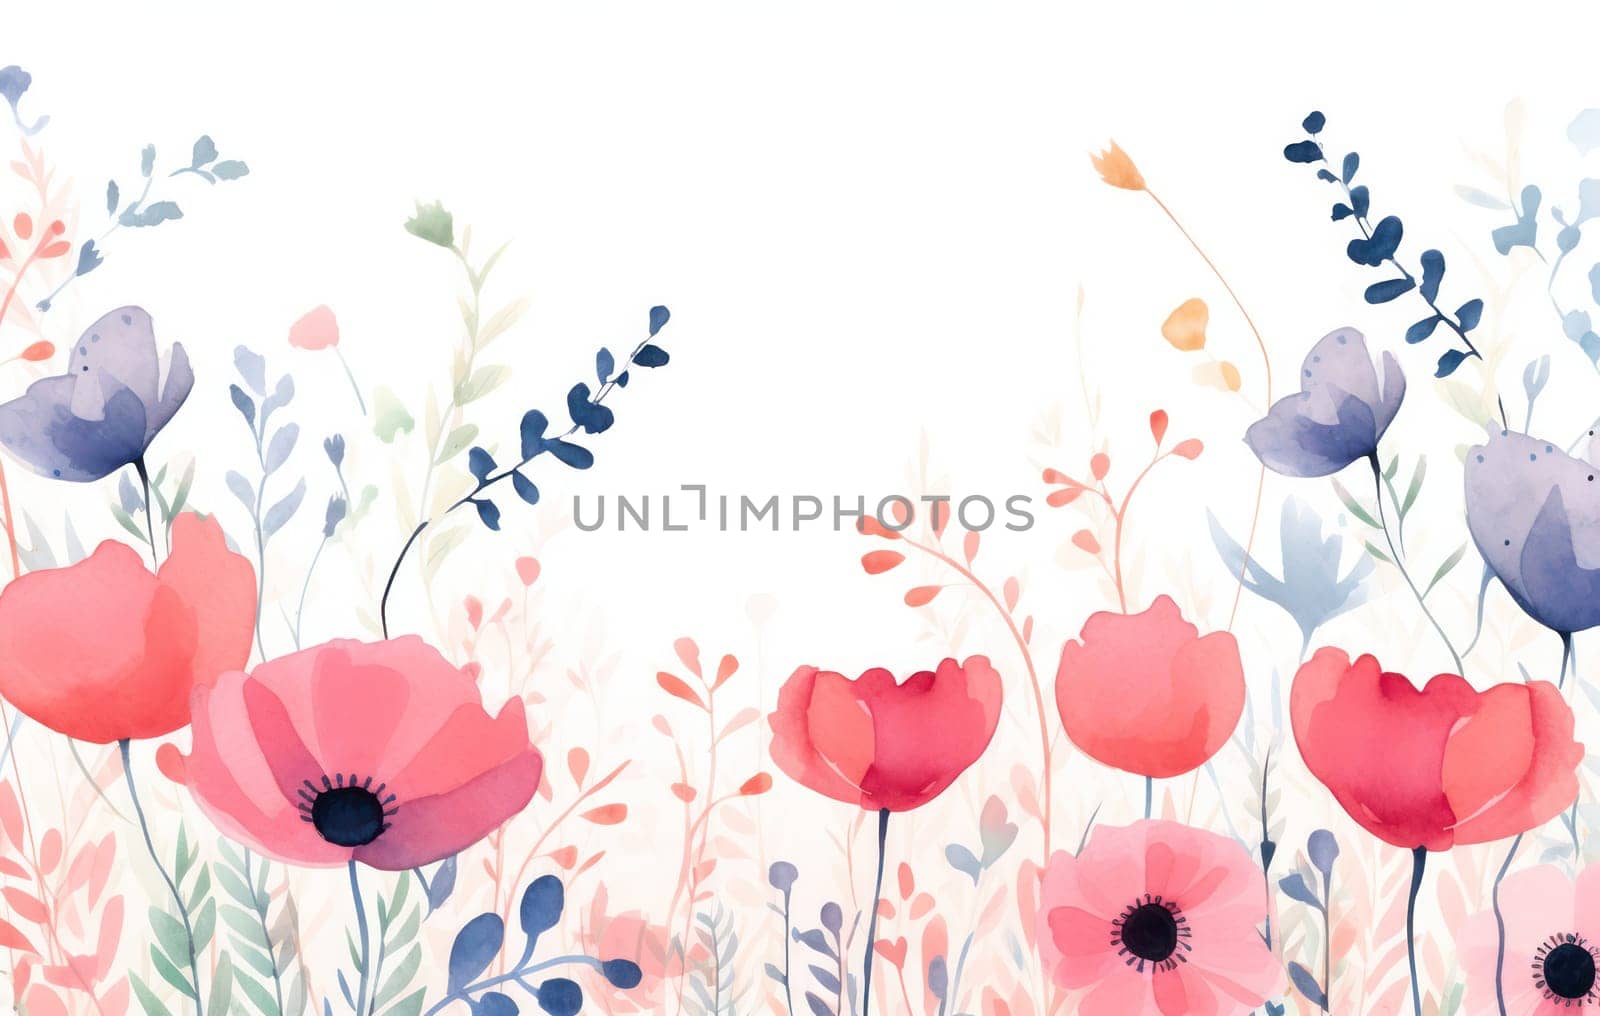 Romantic Botanical Watercolor Illustration of a Beautiful Floral Bouquet on a White Background